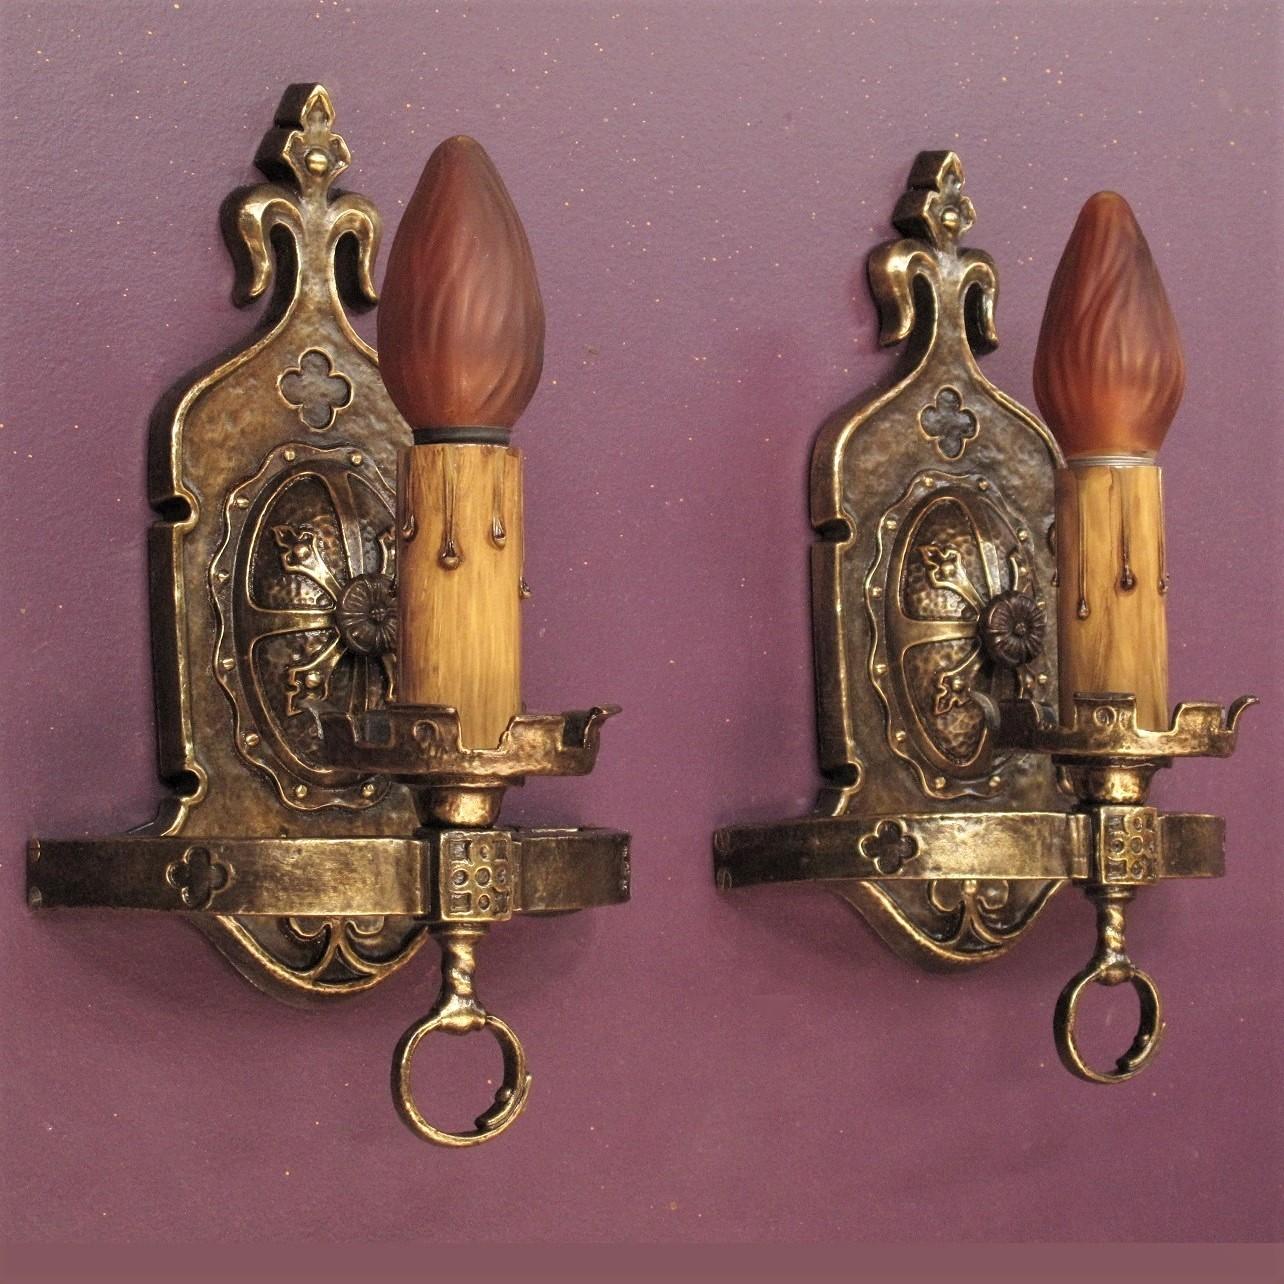 Priced for the pair.
Manufacture by Lion, these are hefty in both weight and design. Restored to bring out the solid cast brass construction as well as all the elements incorporated into the design. With no paint used in their restoration, what you